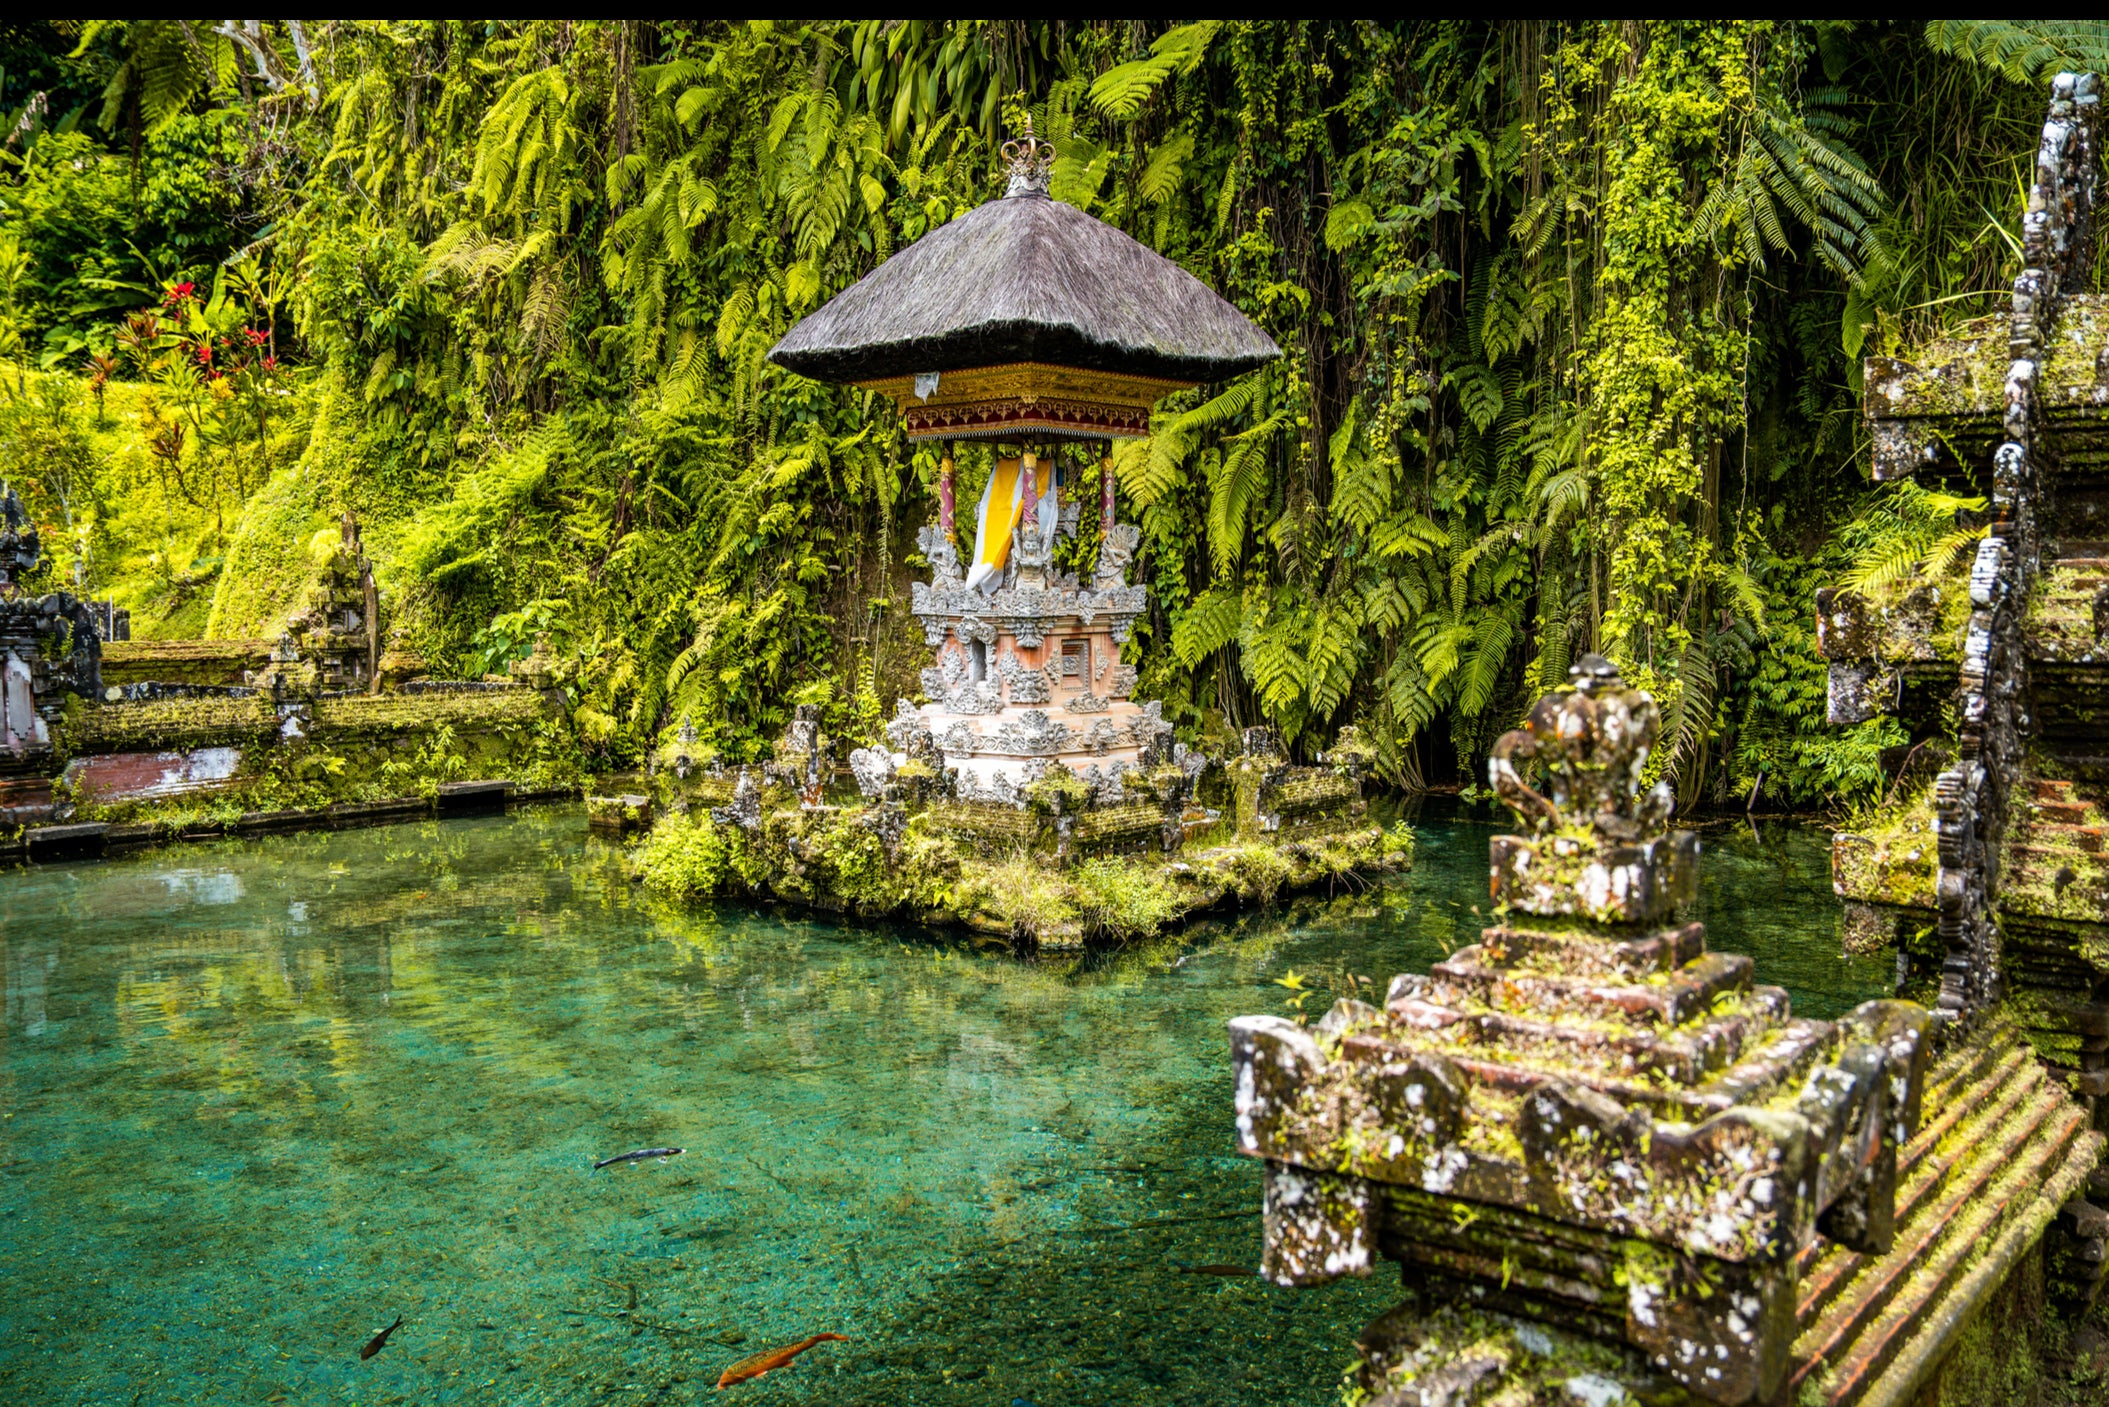 Bali is known as Island of the Gods, in part due to the large amount of temples found throughout